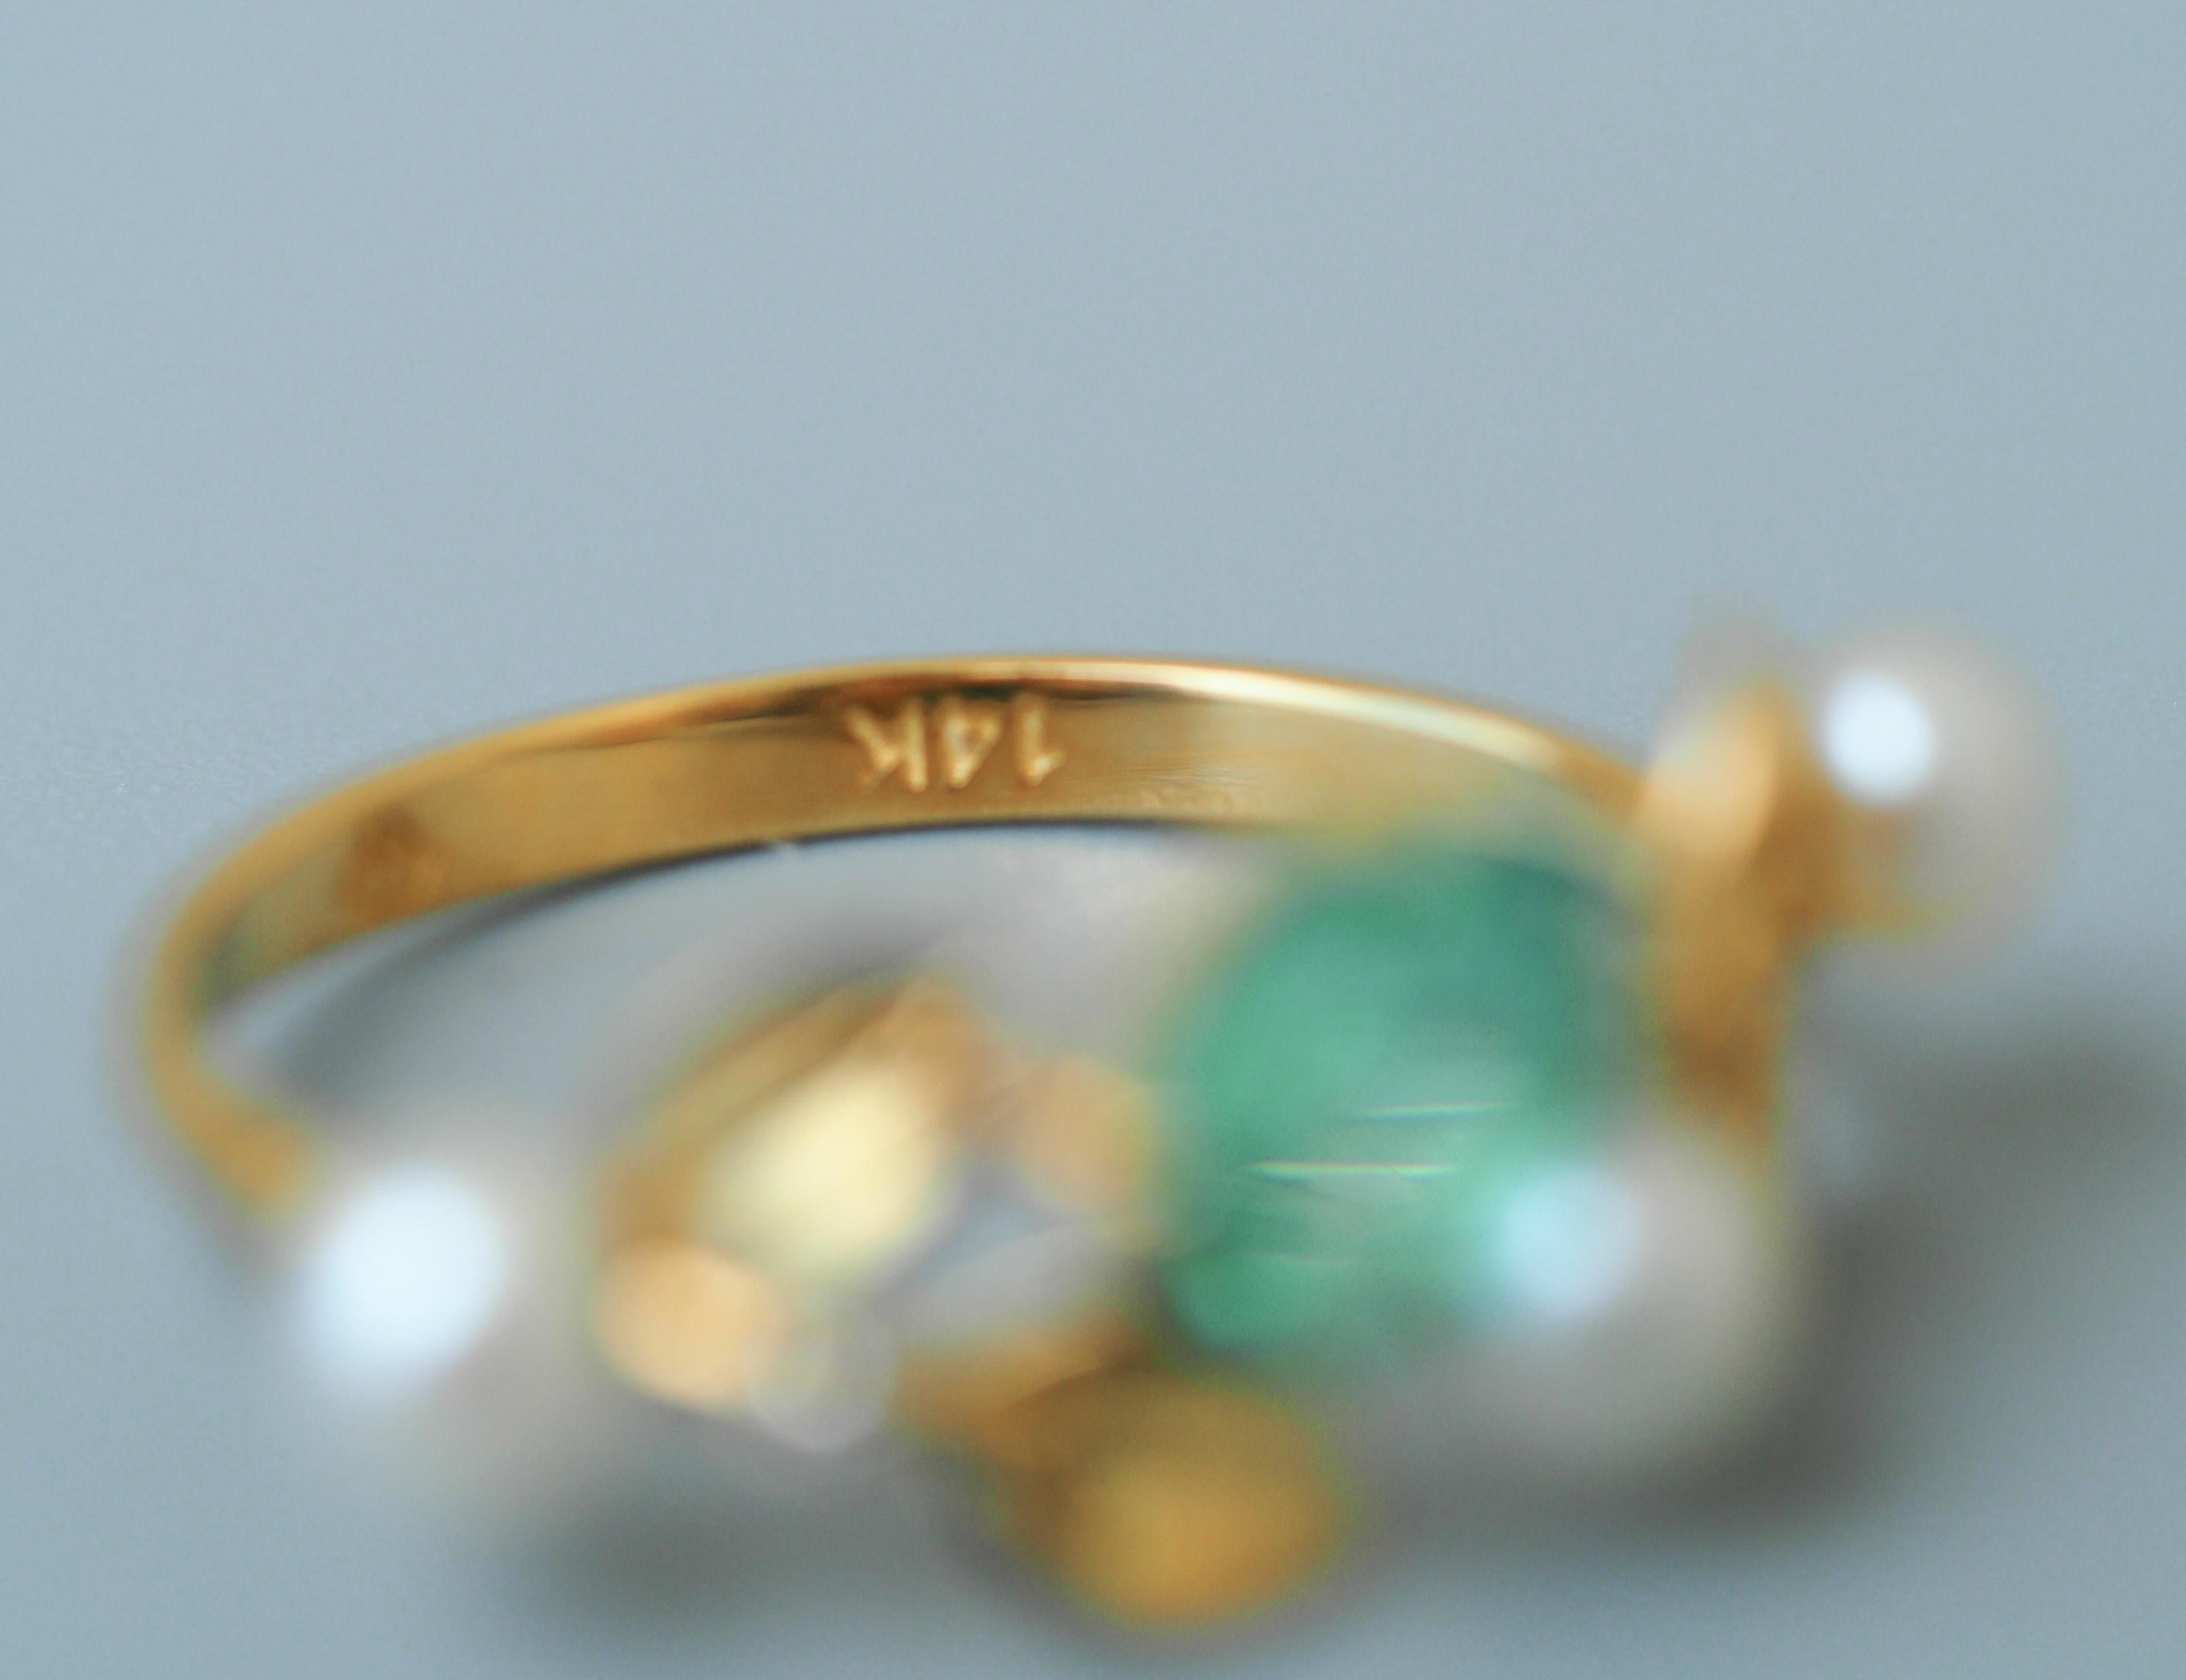 For Sale:  14k Gold Floral Ring with Oval Apatite, Diamonds and Pearls 5